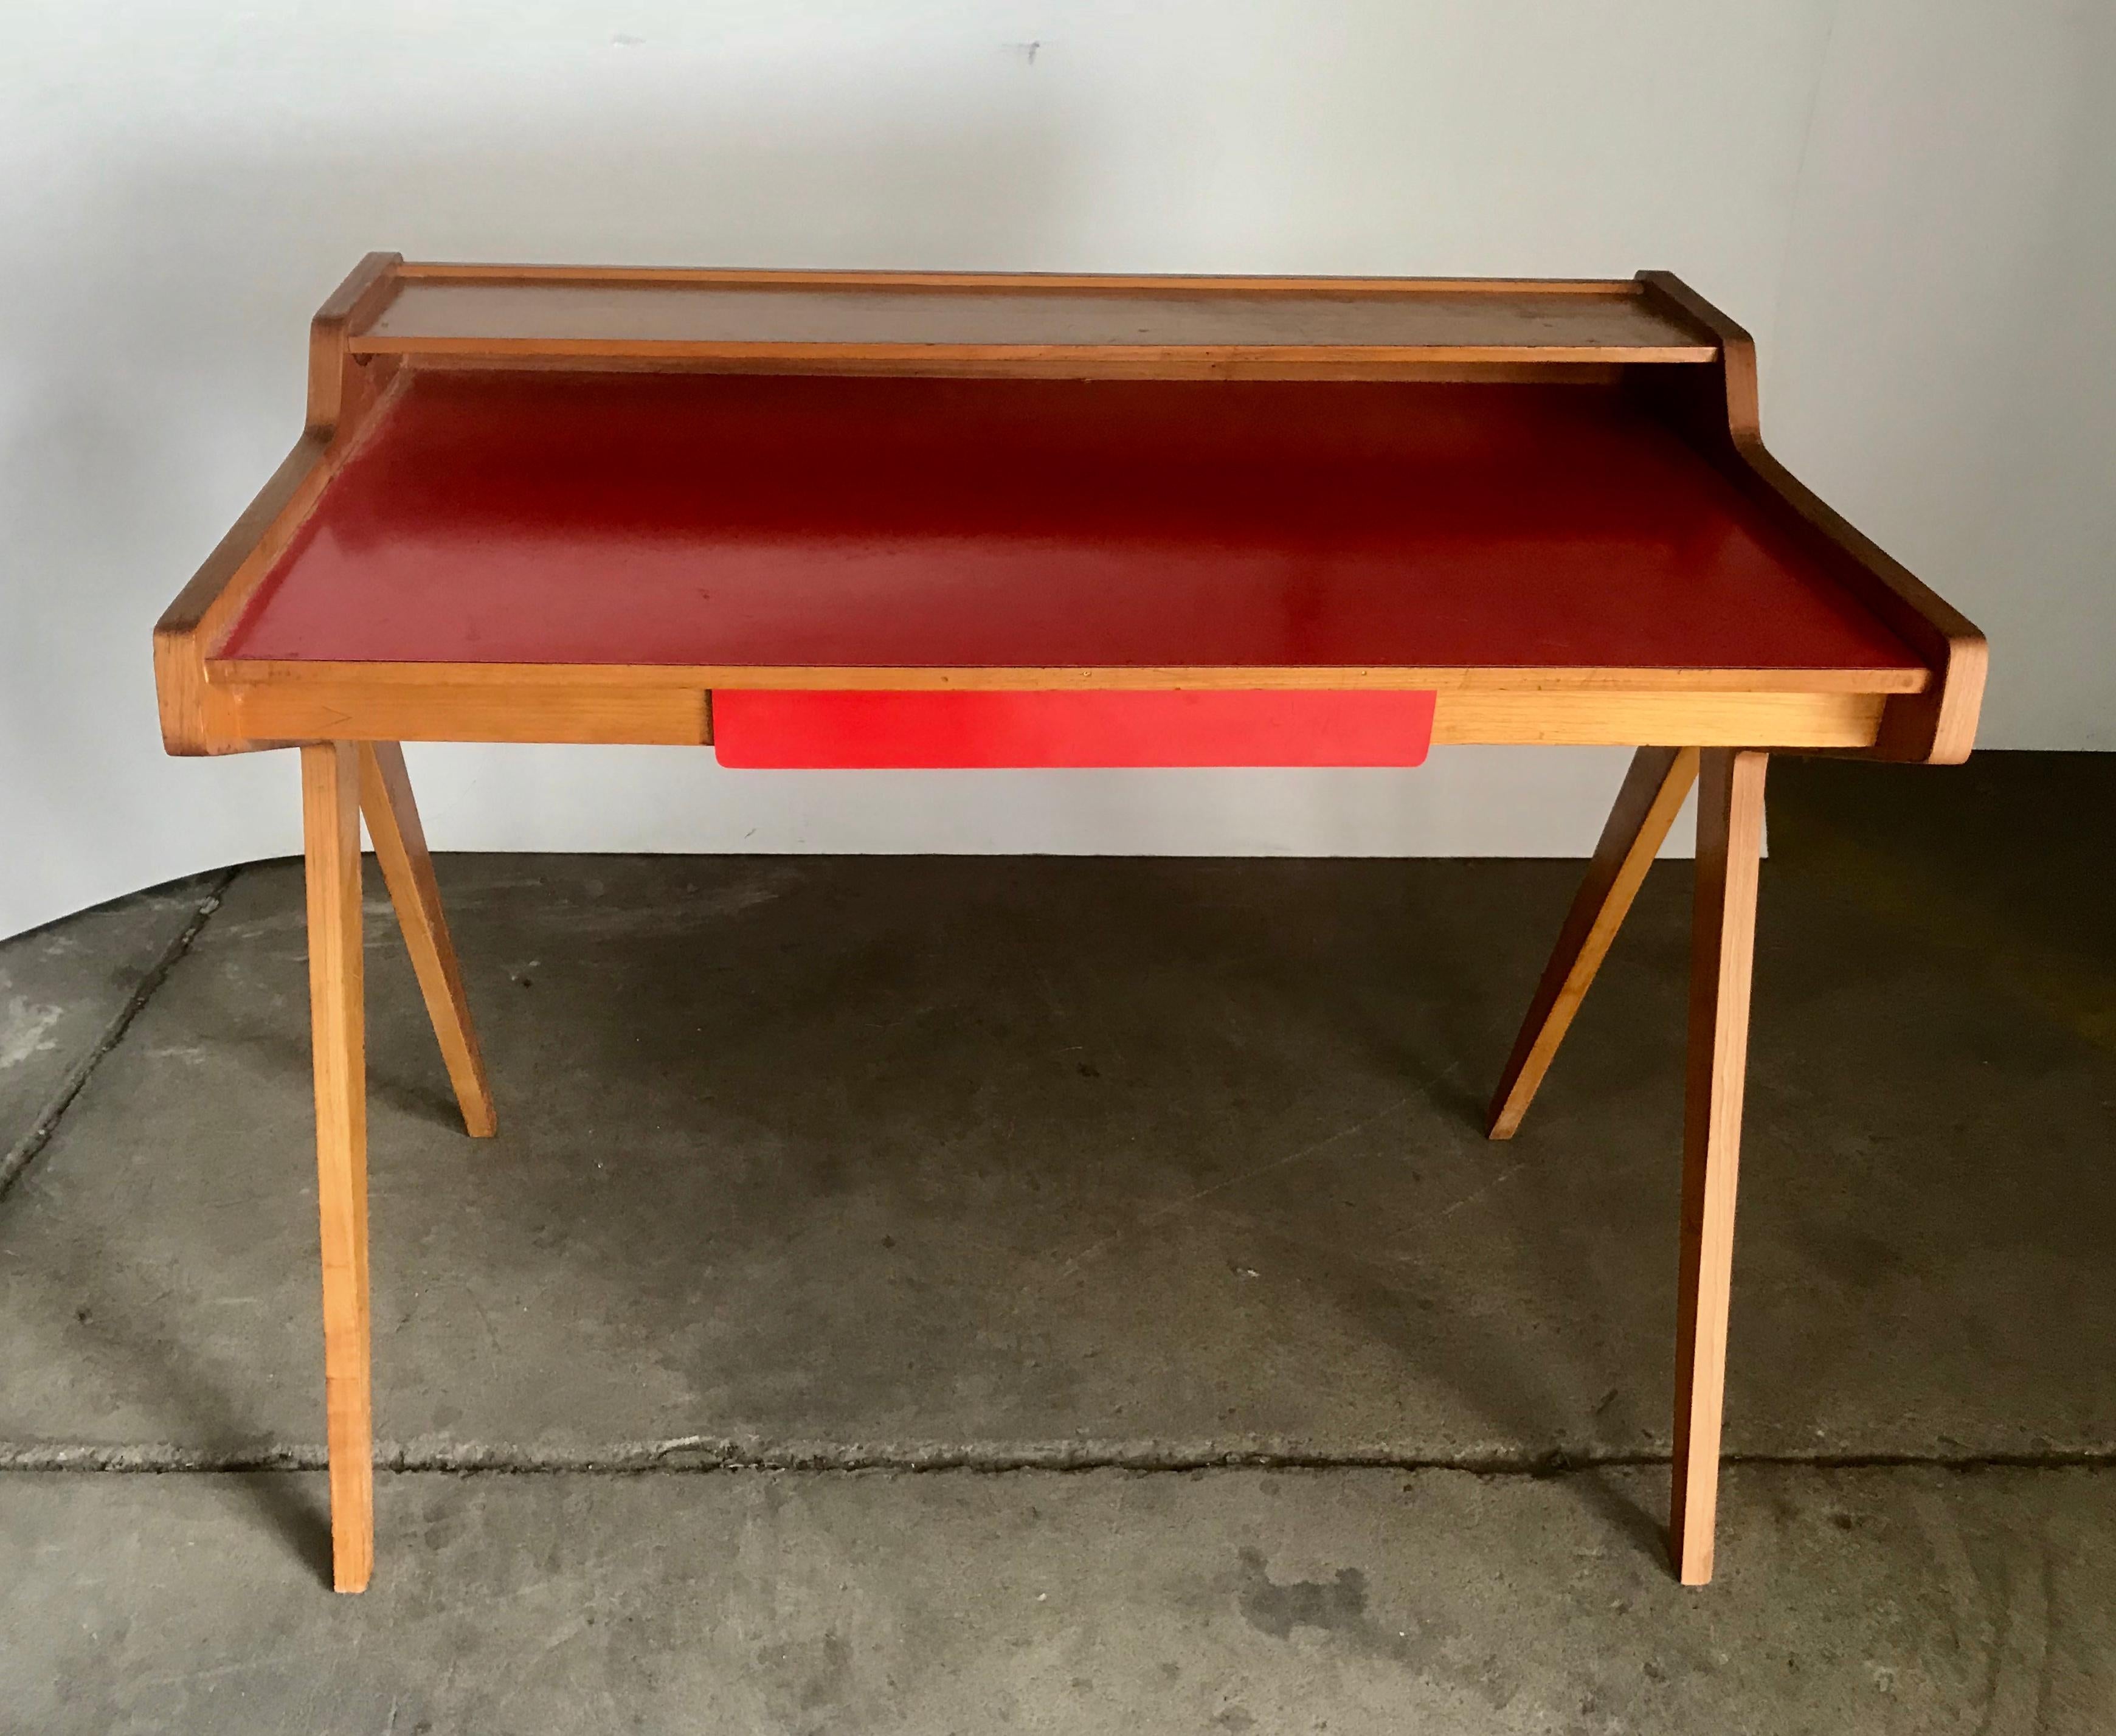 Mid-Century Modern Modernist Writing Table or desk by Helmut Magg for WK Möbel Germany, 1955